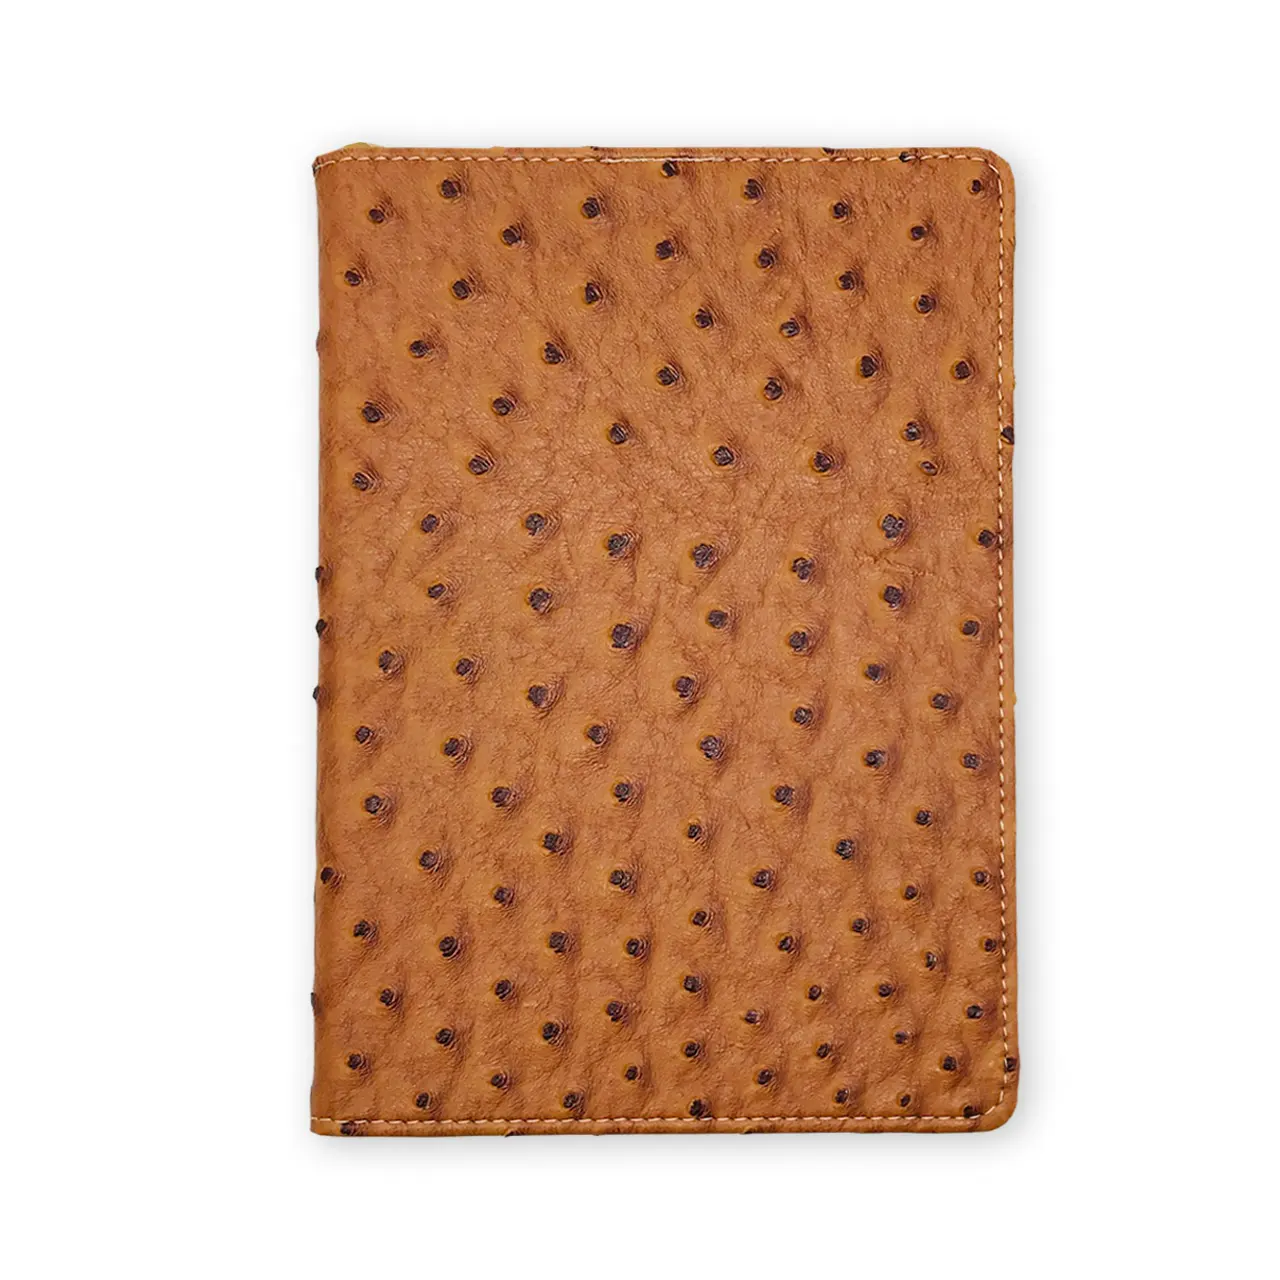 Stock - Custom A5 PU leather hardcover notebook with quotes on each page